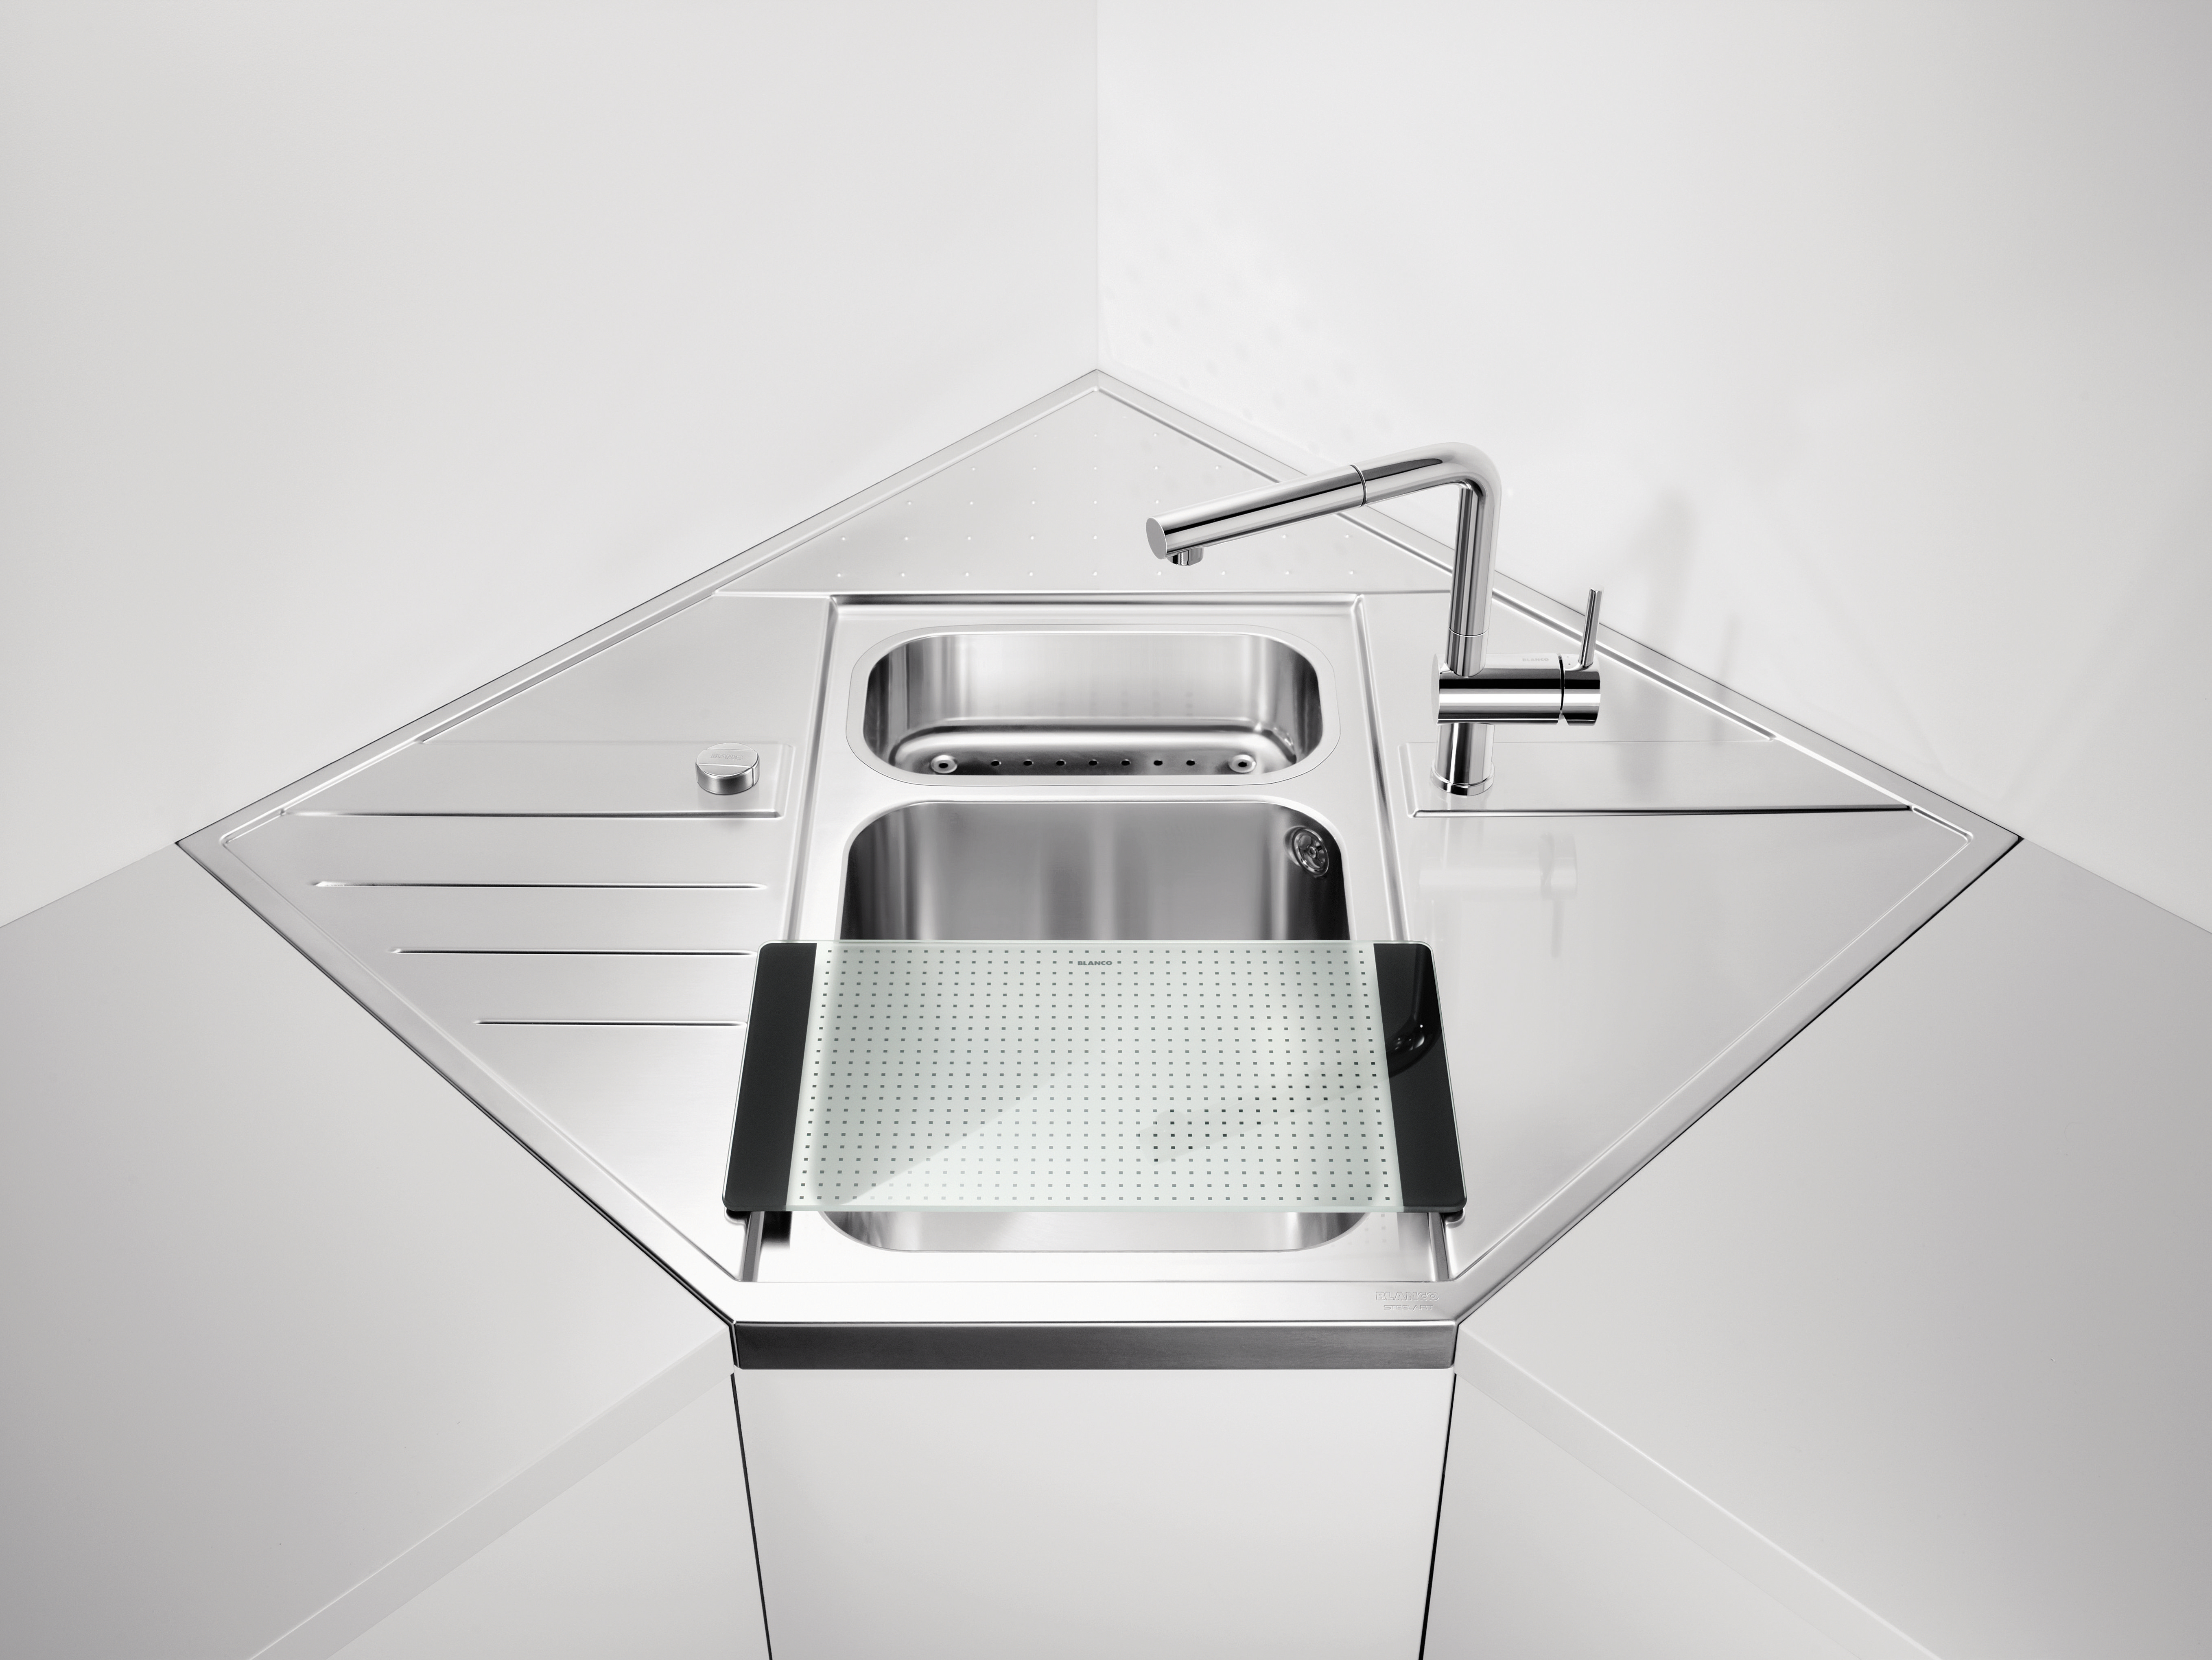 BLANCO corner sinks are miracles of compact design for small kitchens